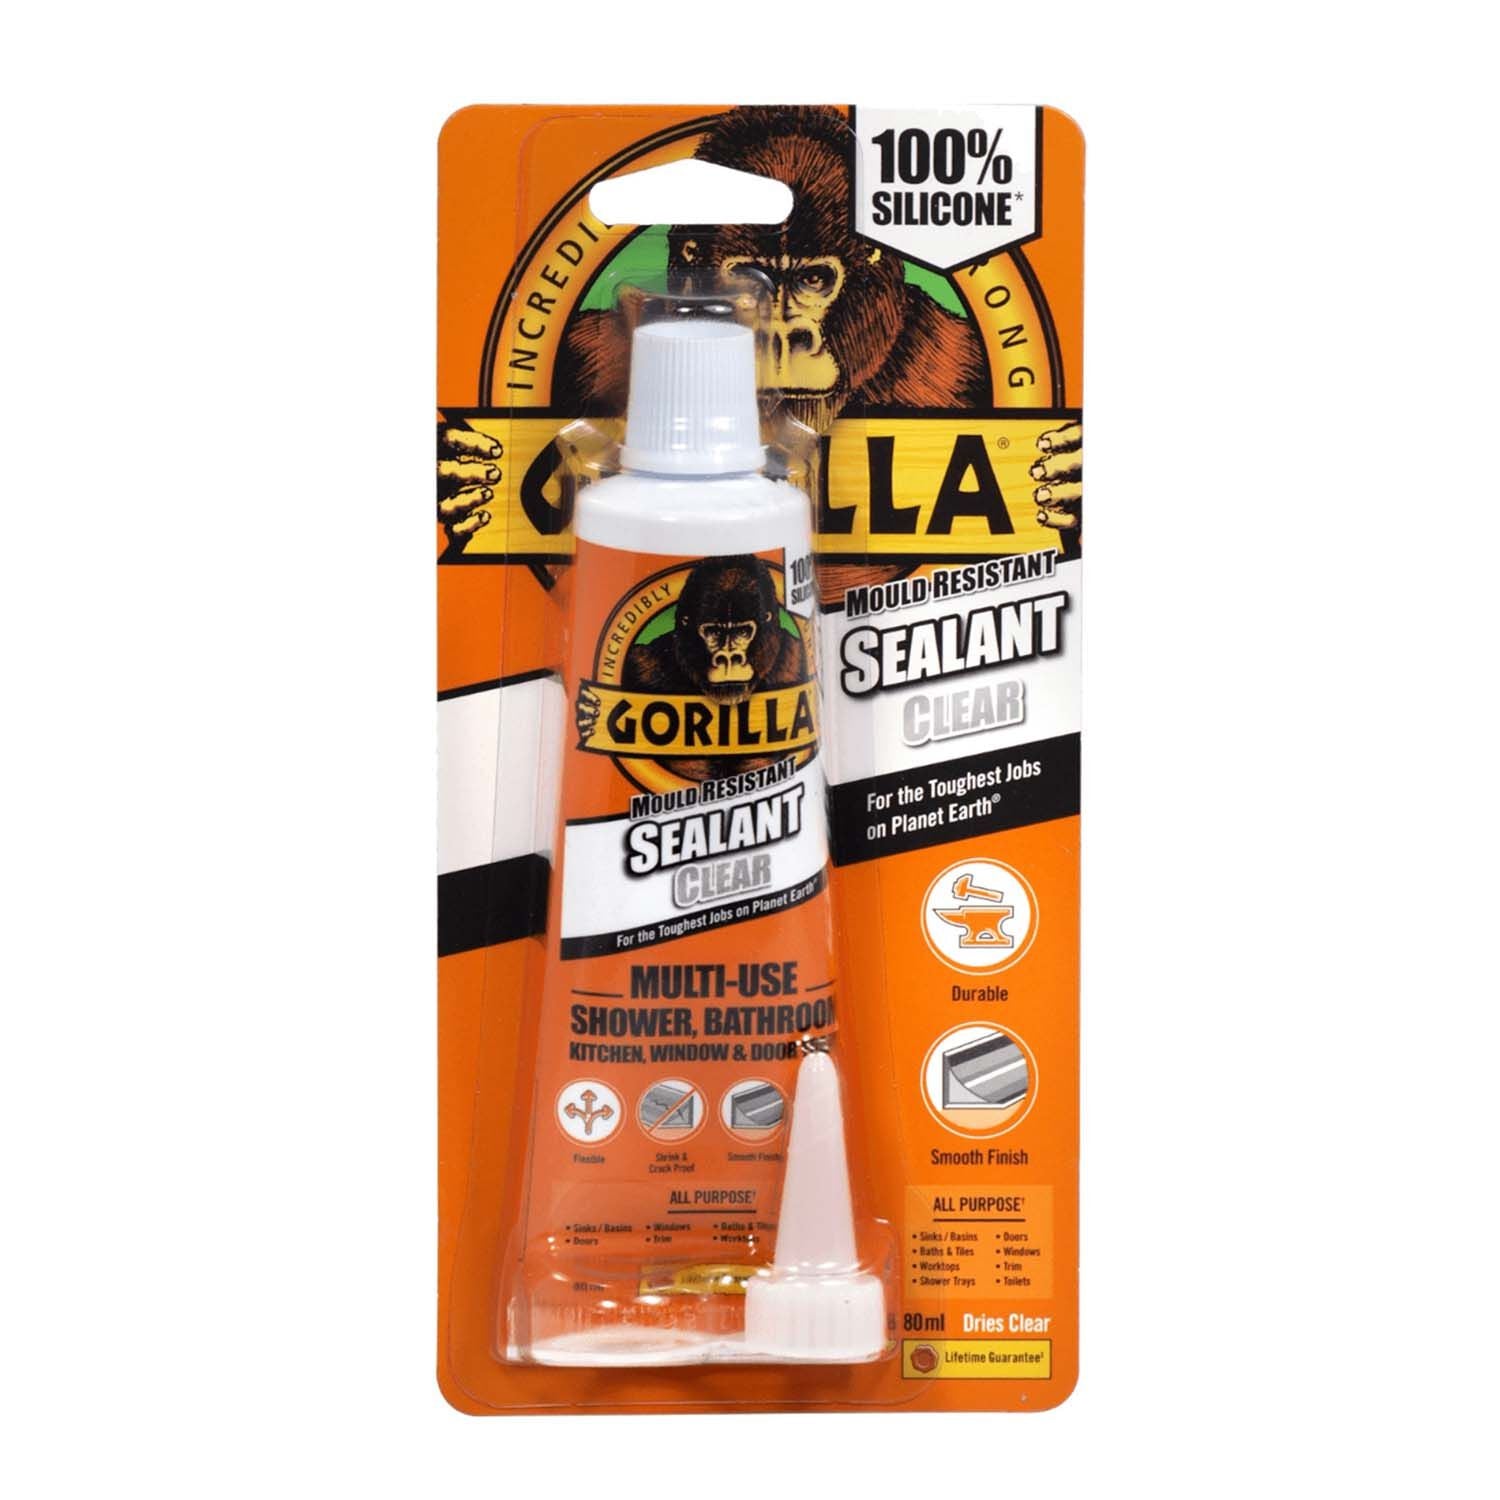 Mould Resistant Clear Sealant 80ml